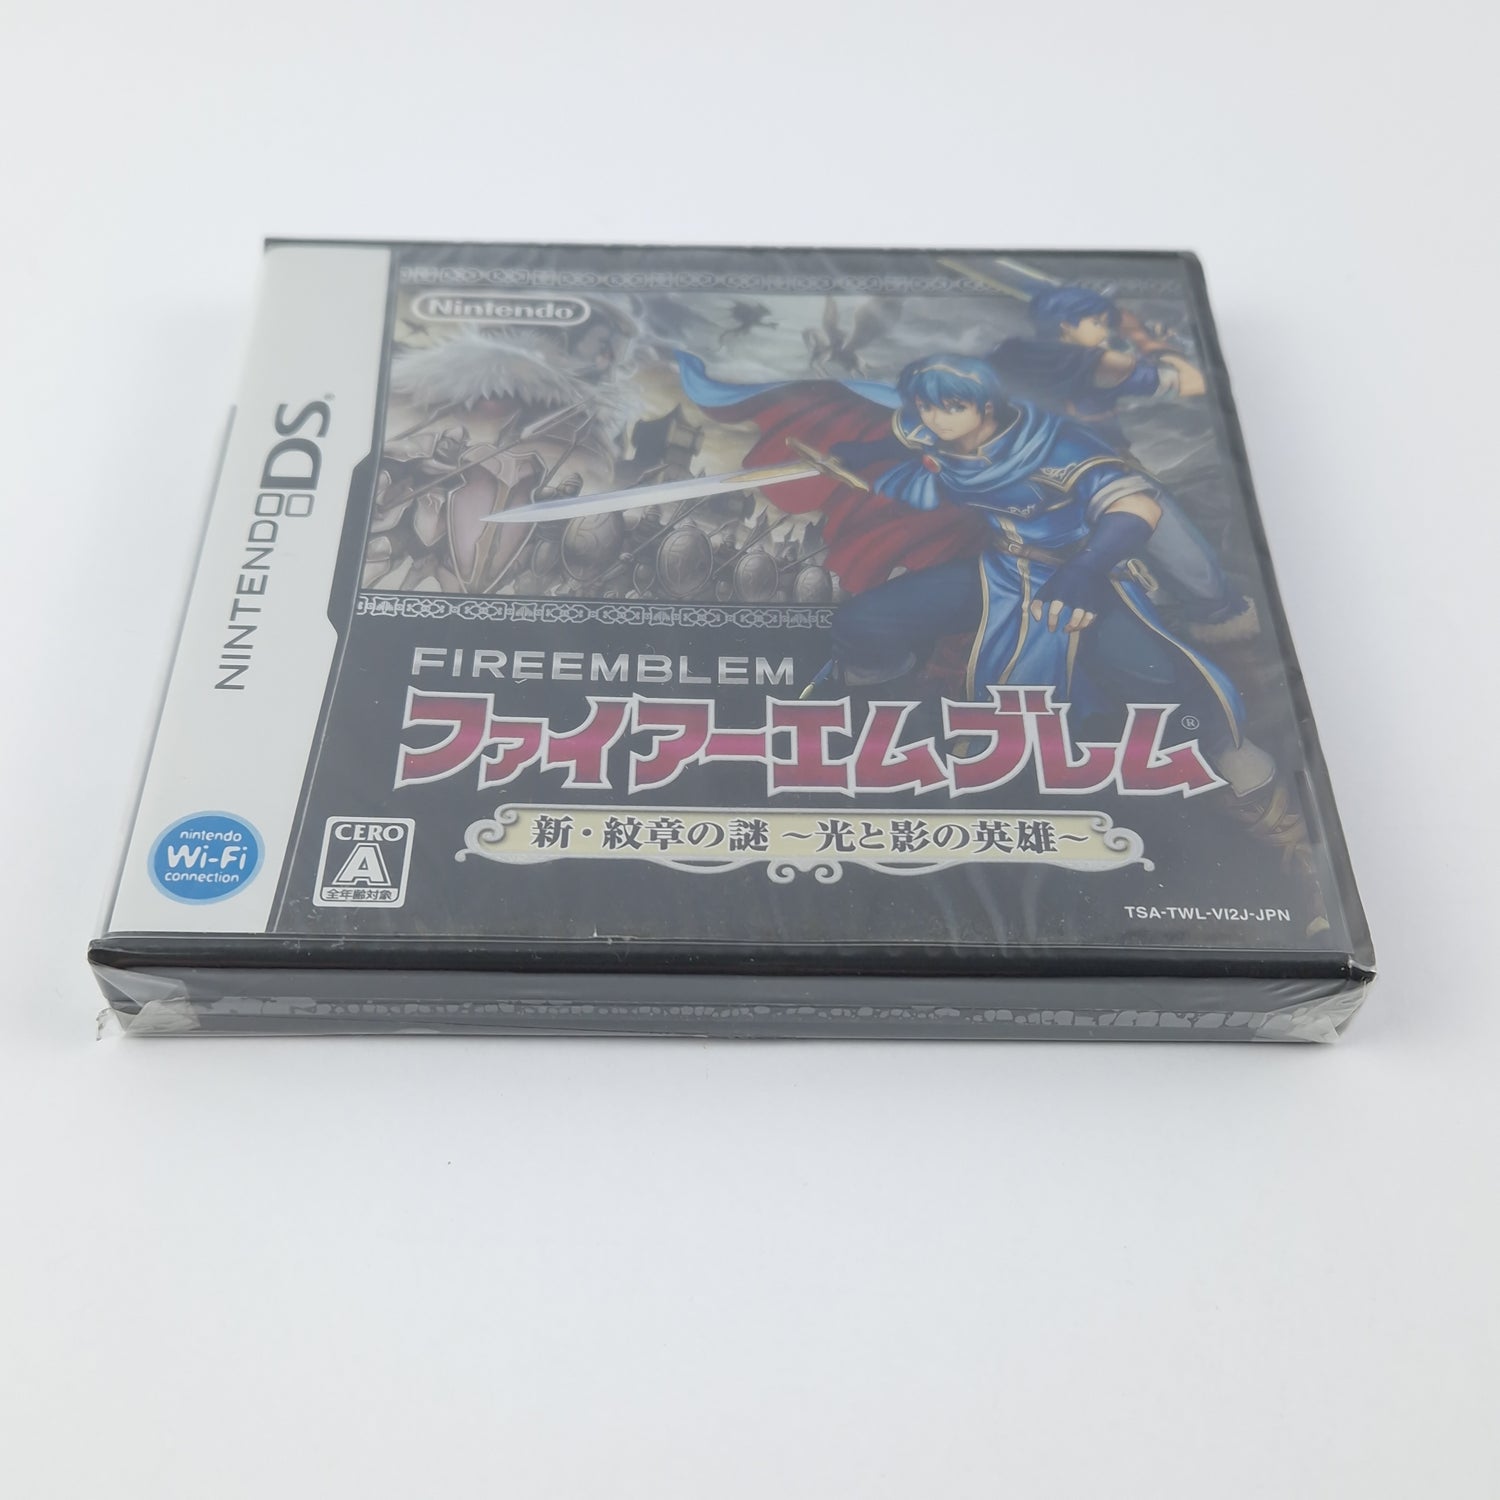 Nintendo DS game: Fire emblem new mystery of the emblem + Guide - NEW SEALED